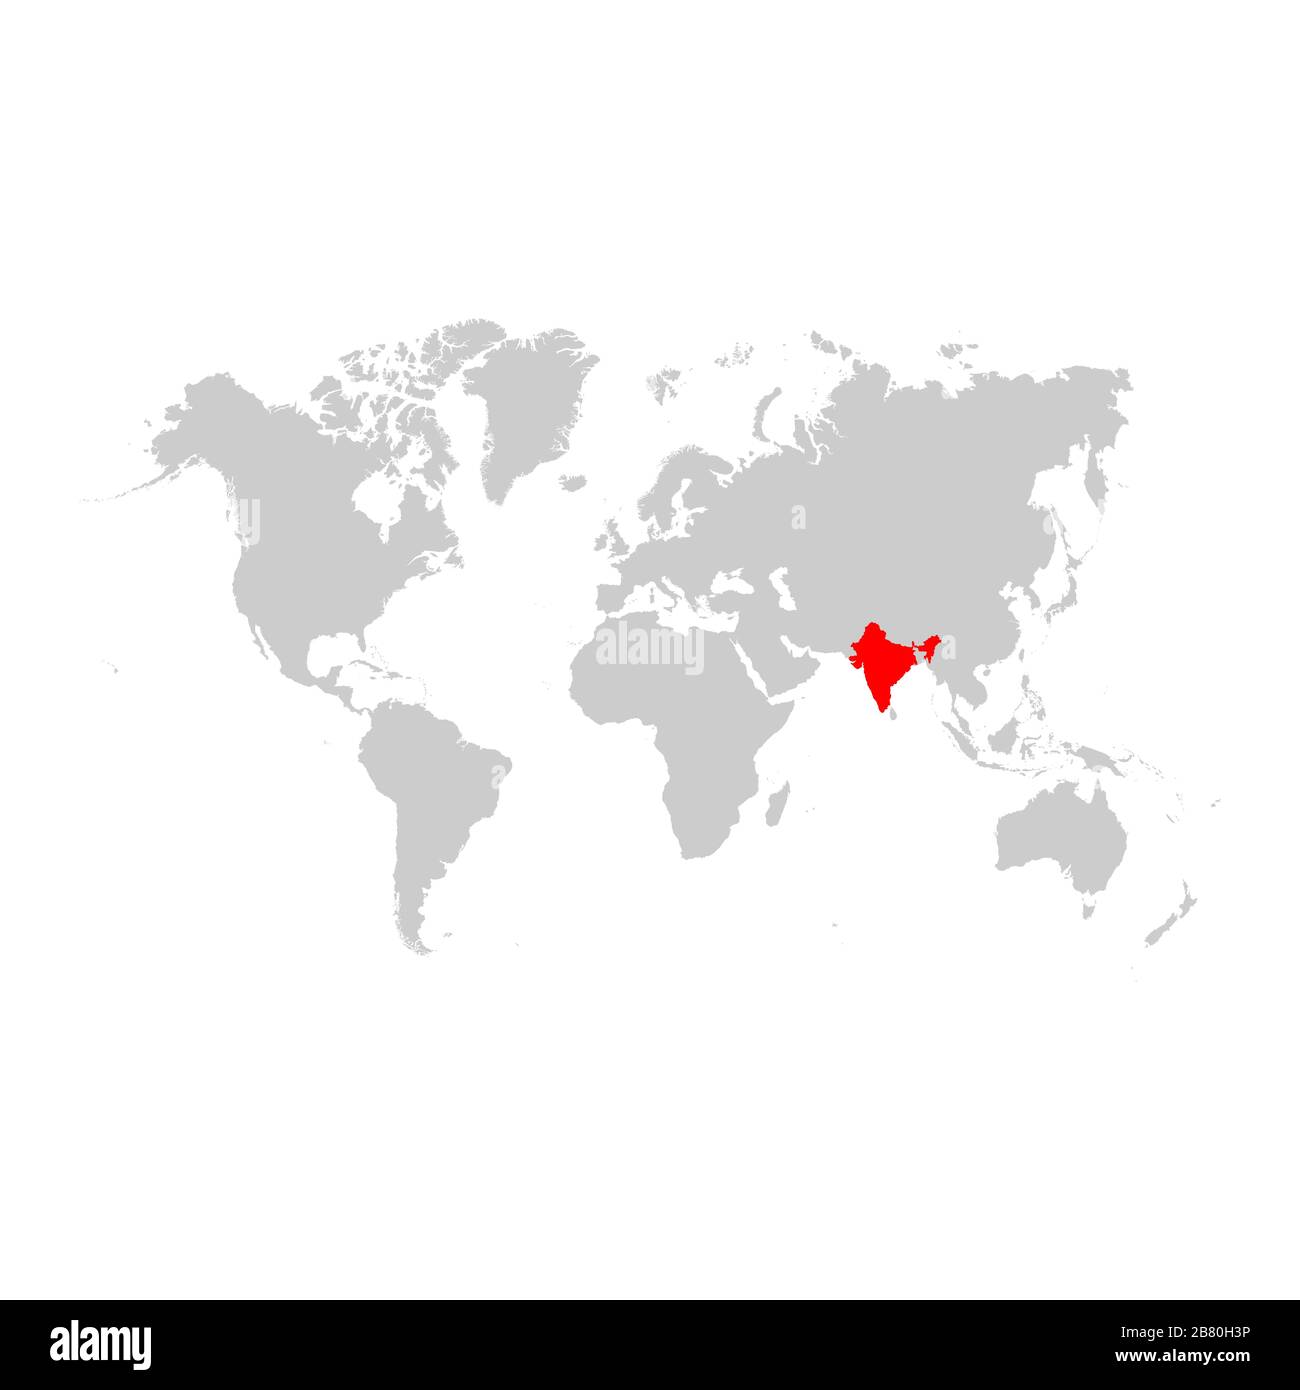 India on world map Stock Vector